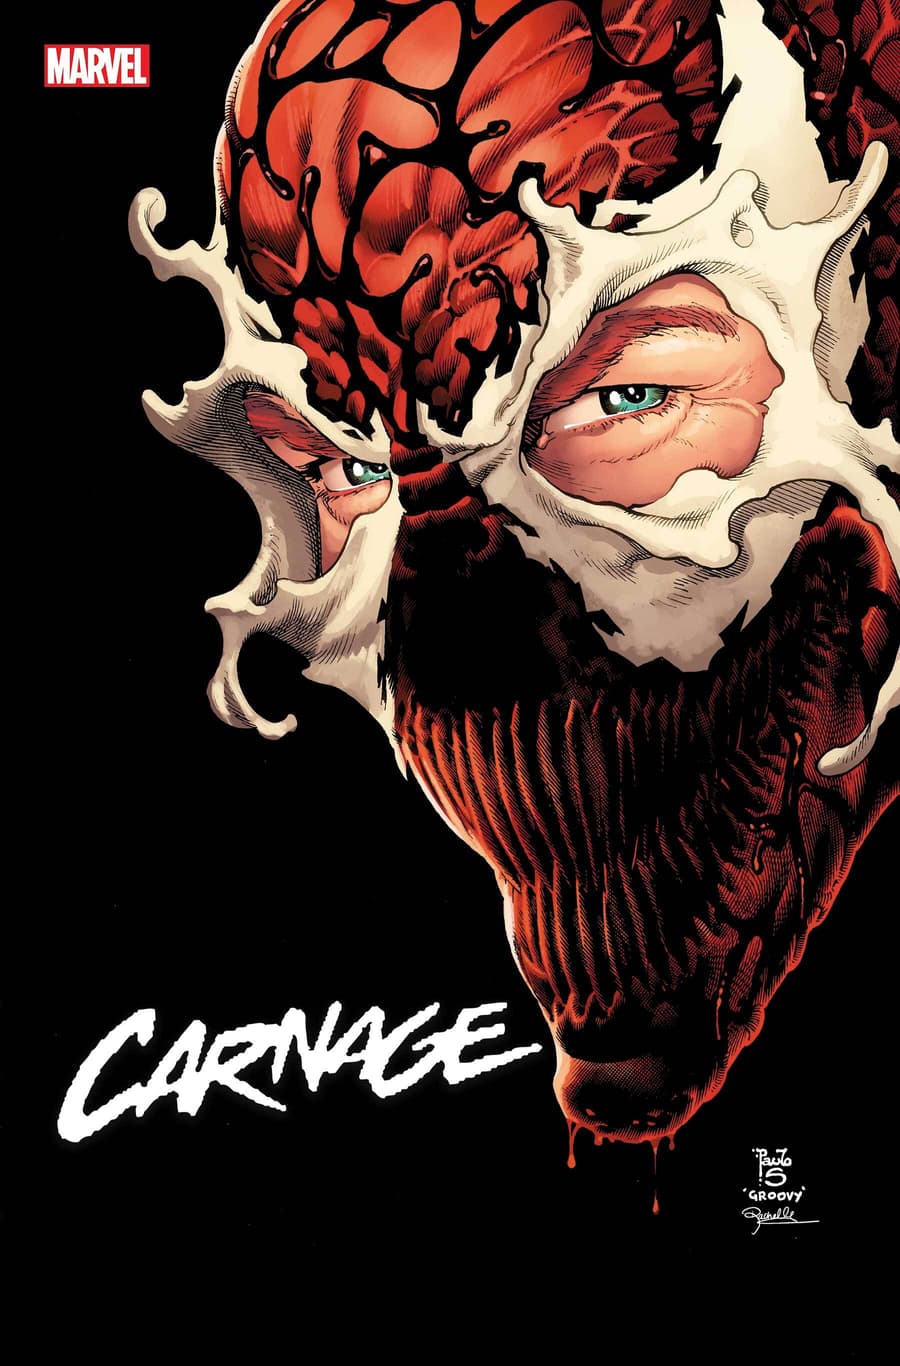 CARNAGE #1 cover by Paulo Siqueira